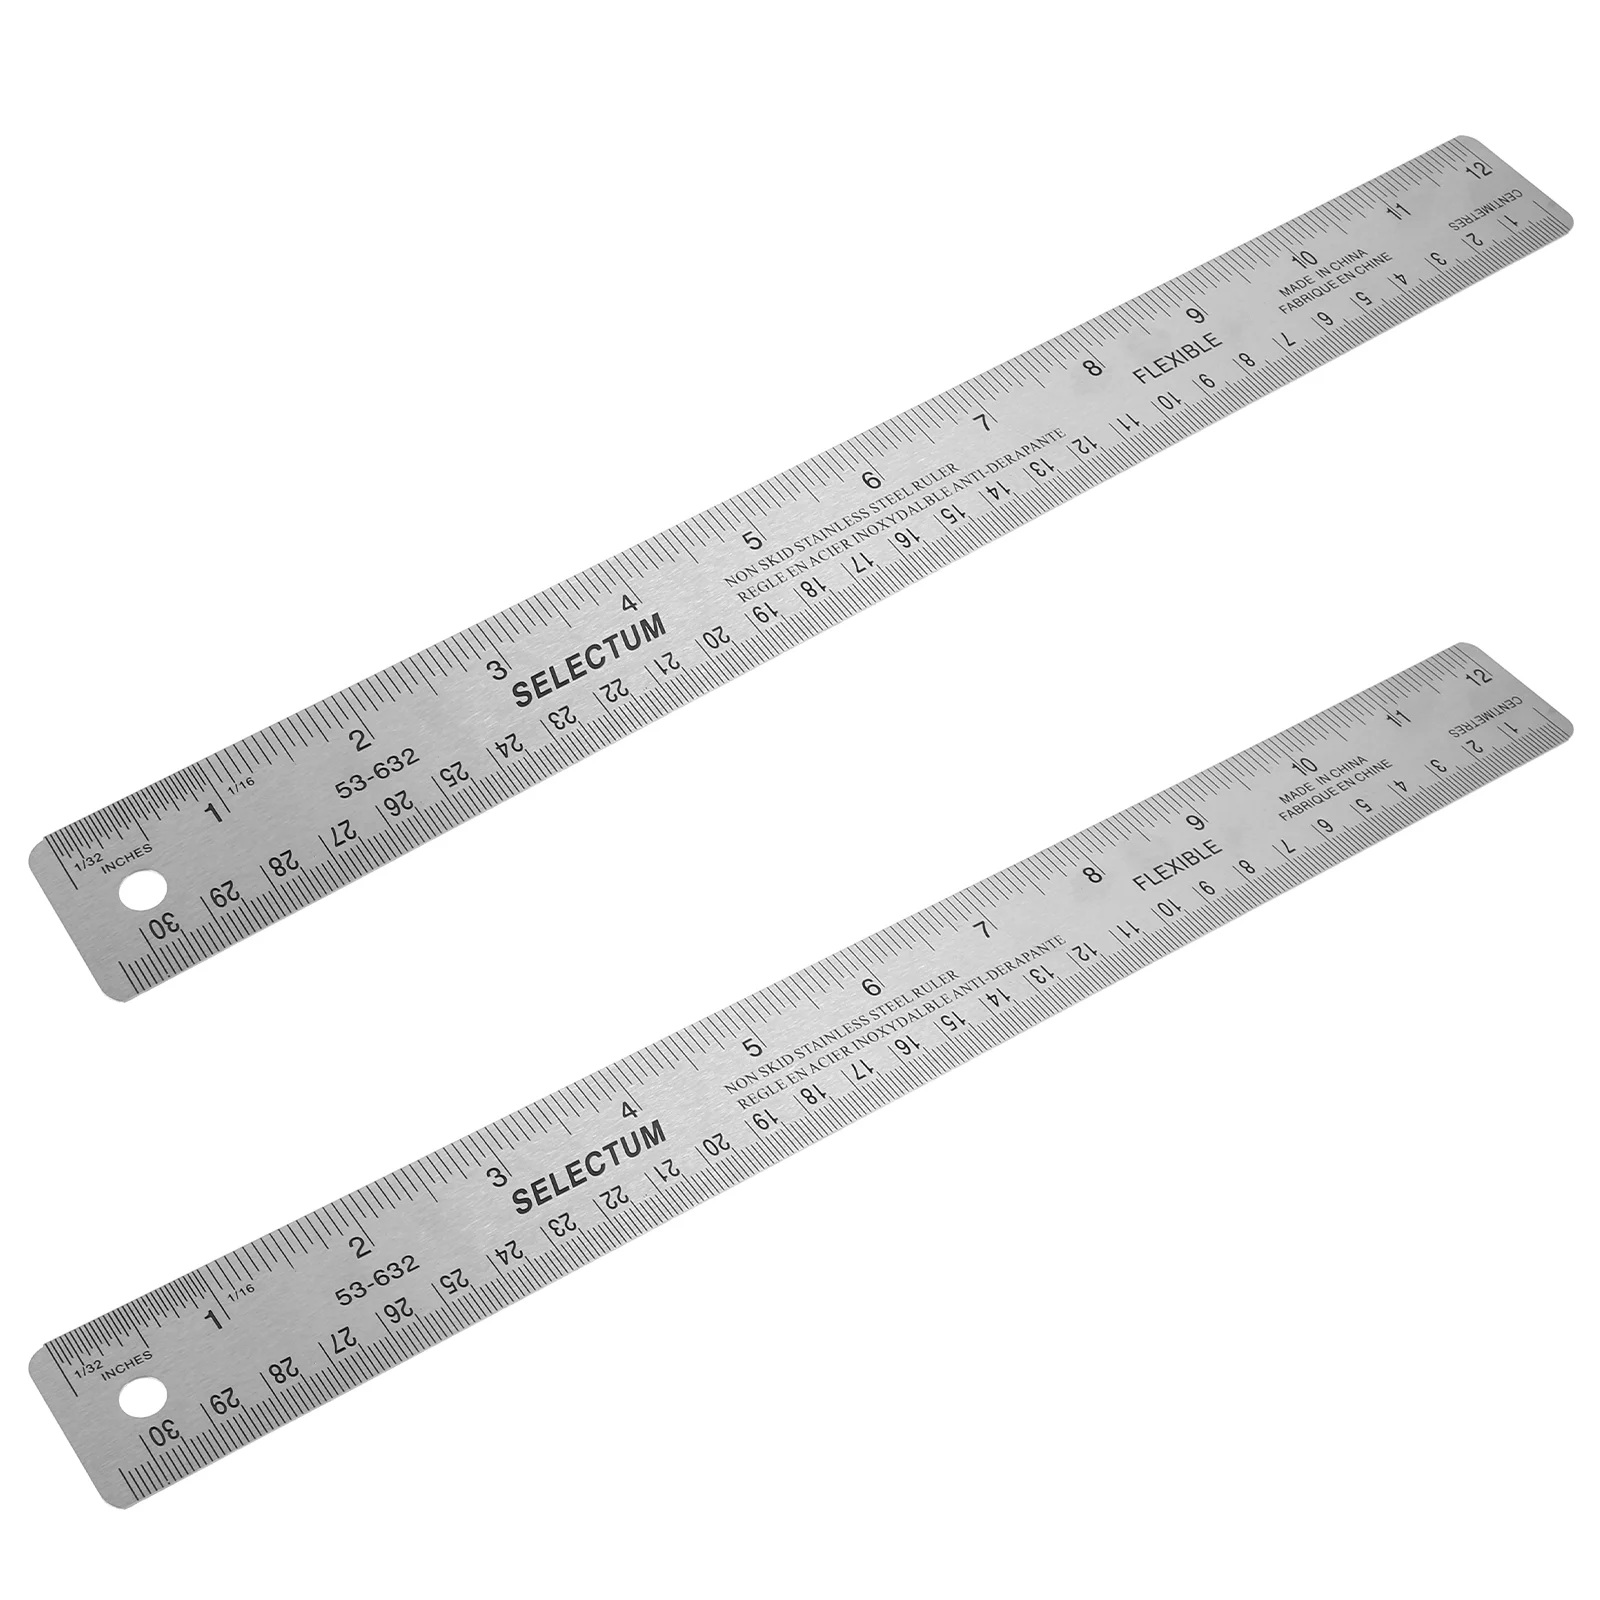 2 Pcs Cork Stainless Steel Ruler Precison Mechanic Tools Corked Rulers for Engineering Metal